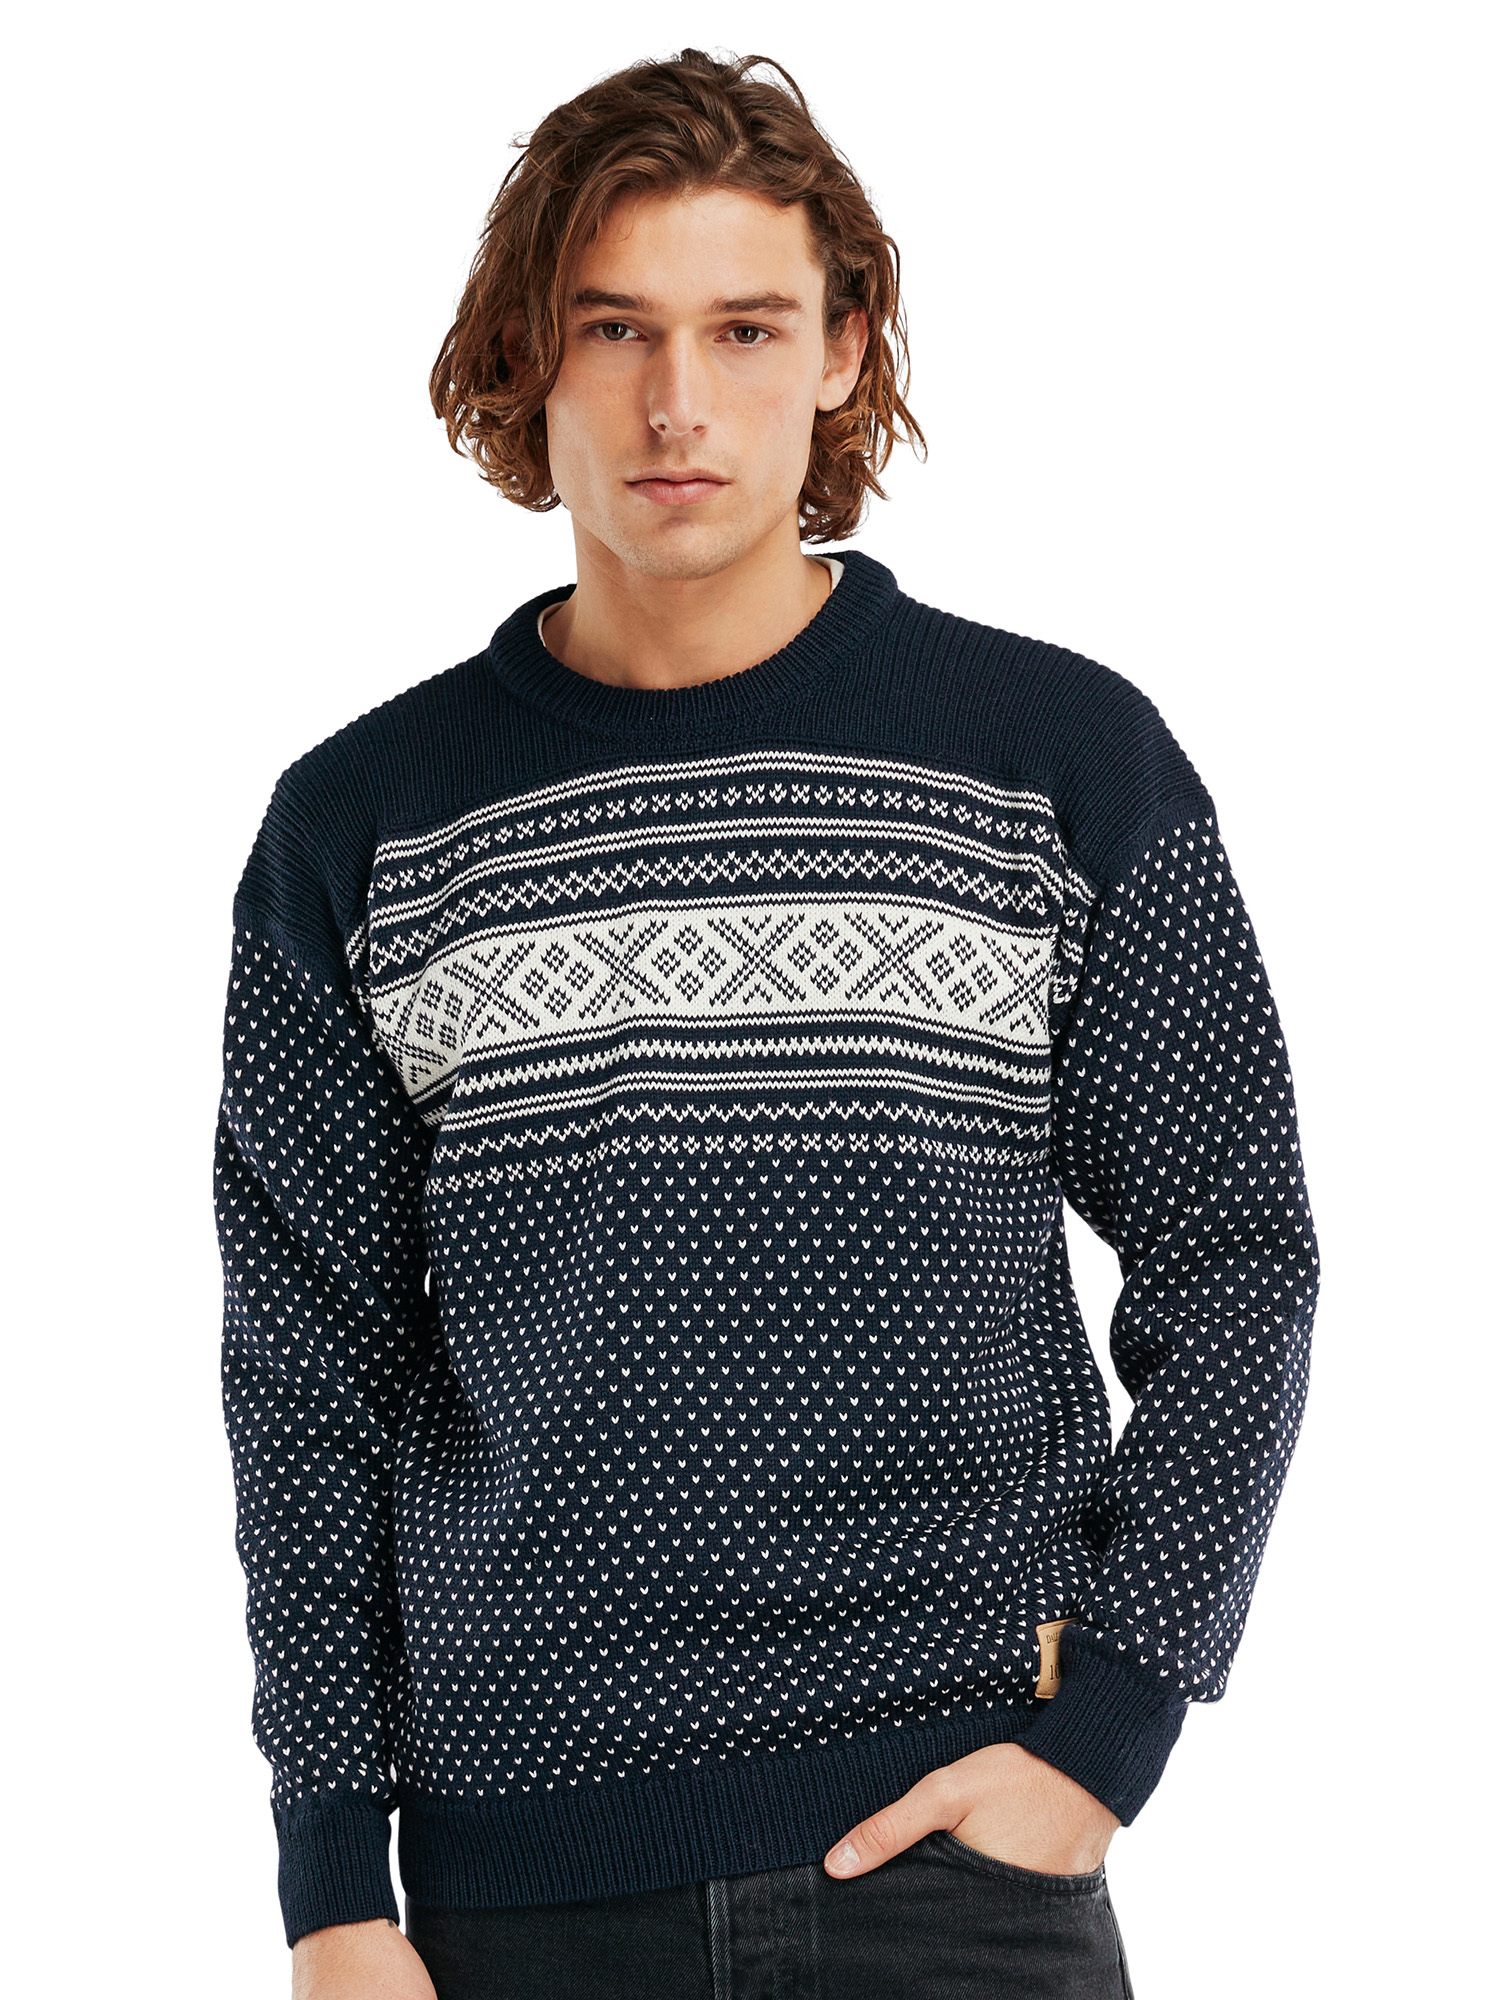 Valloy sweater - Men - Navy/Offwhite - Dale of Norway - Dale of Norway